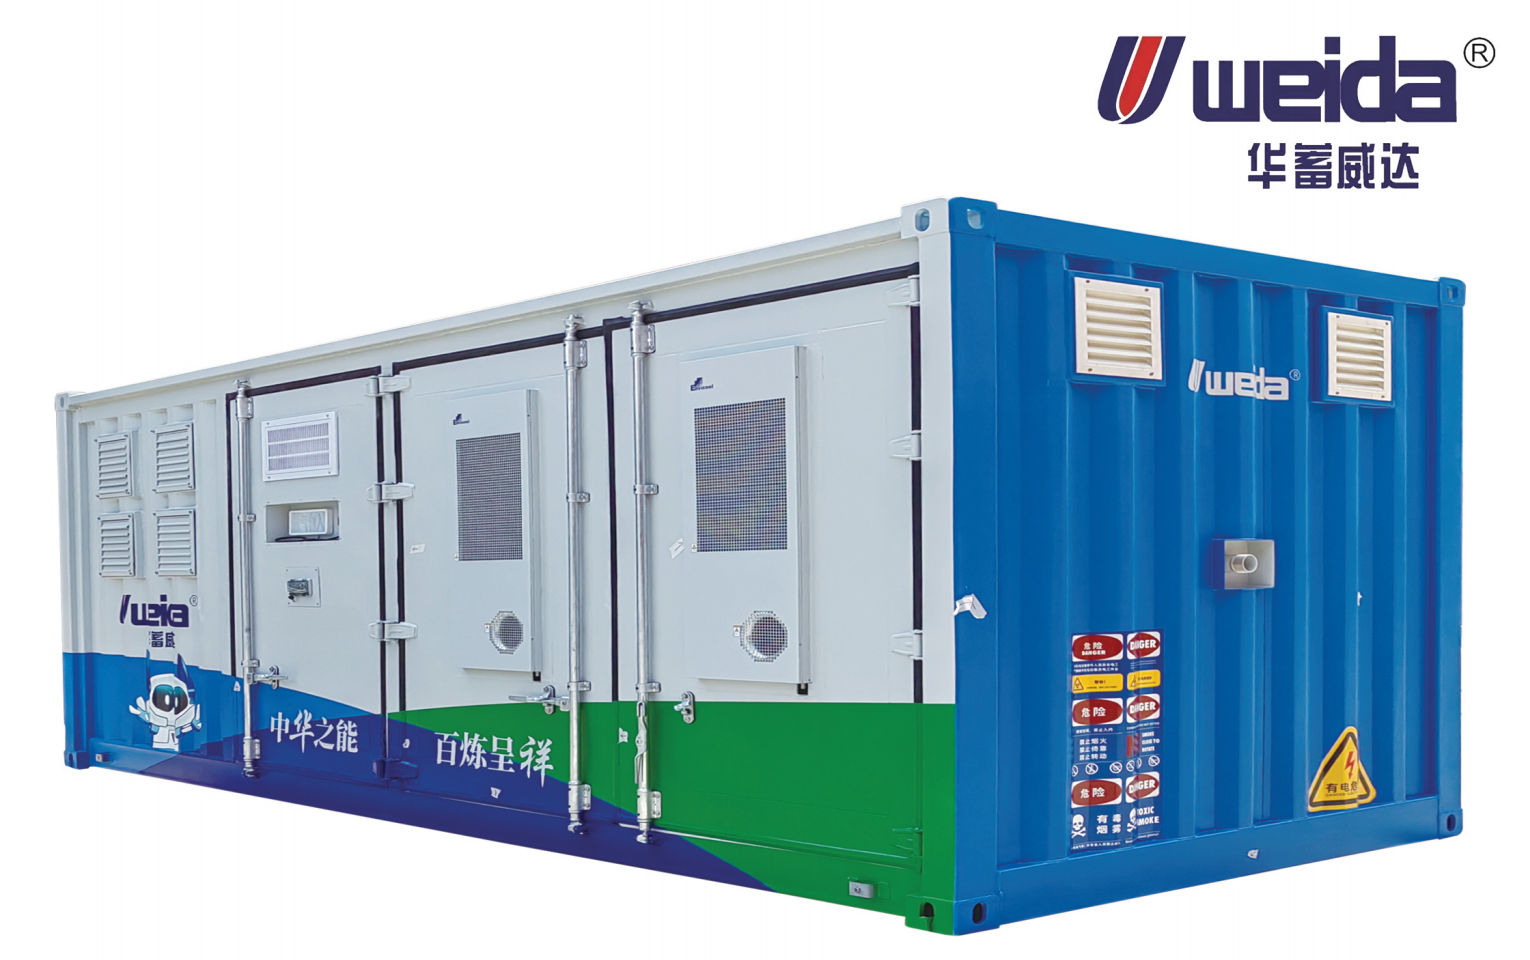 weida Integrated container energy storage system